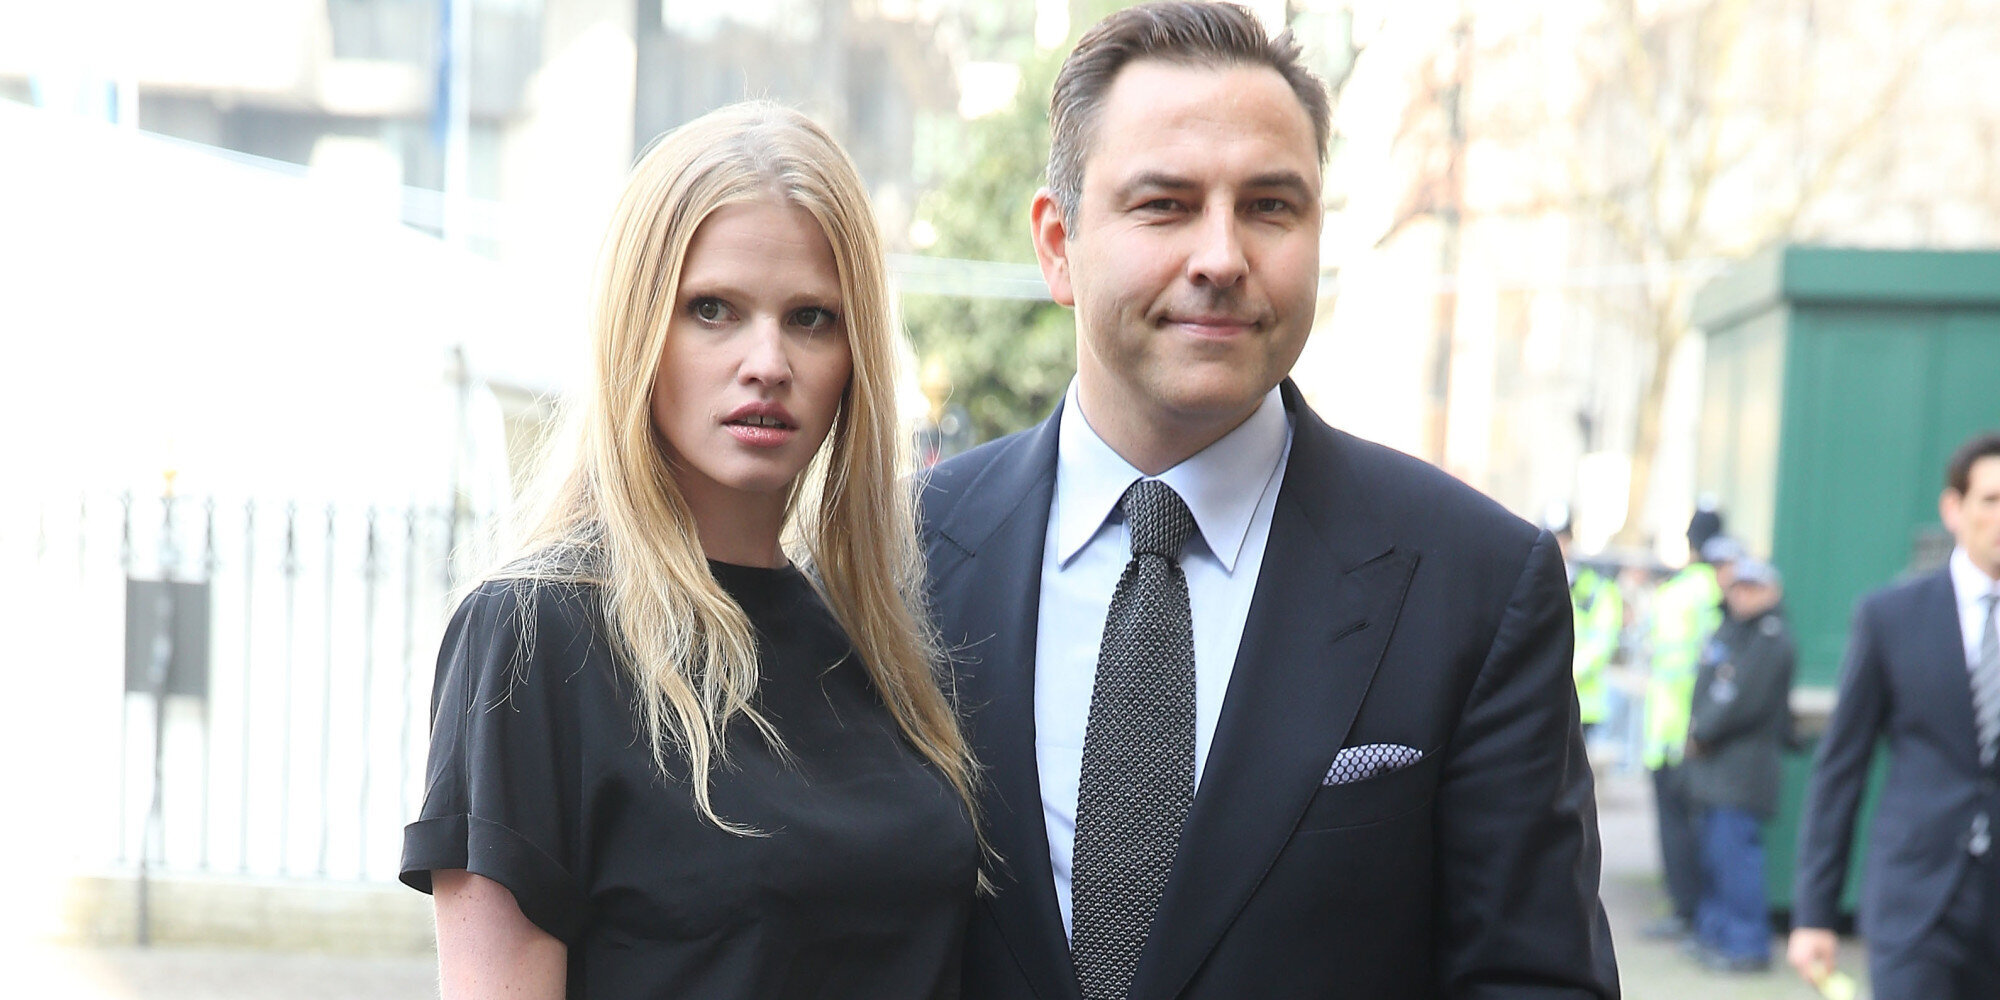 David Walliams 'To Divorce Lara Stone Next Month', After Being Married